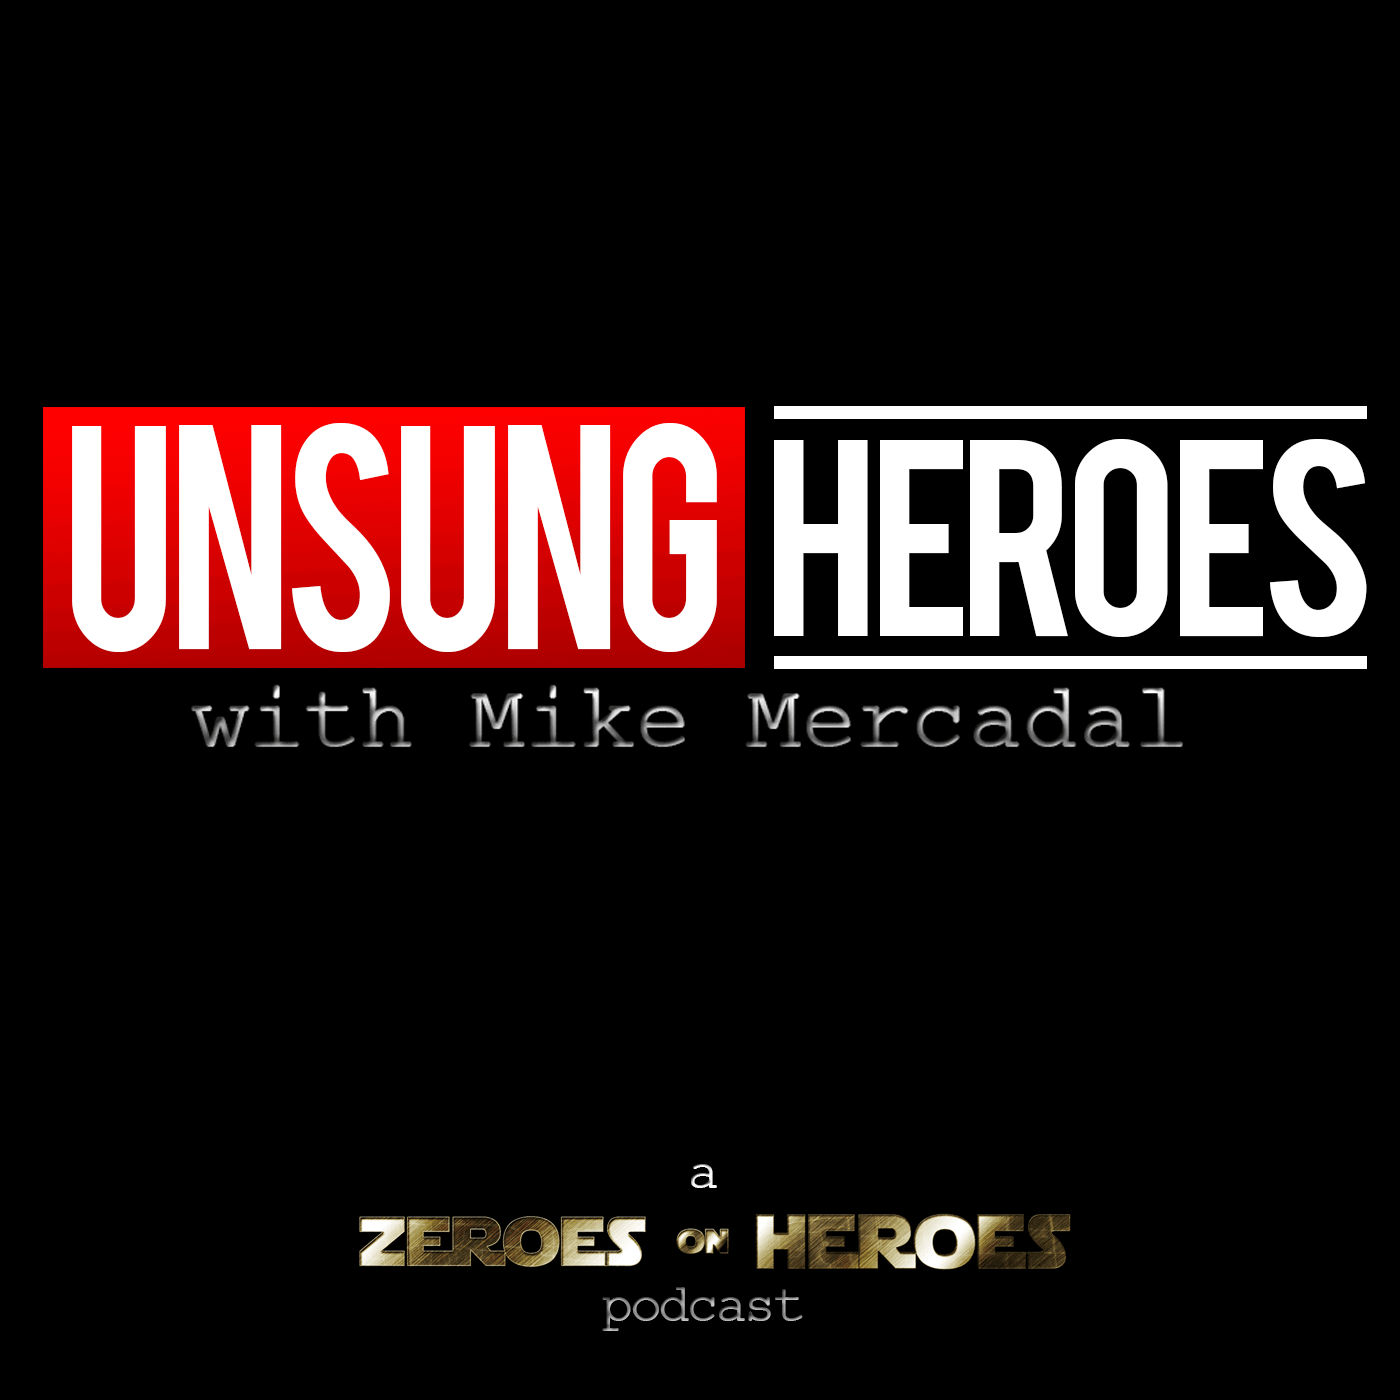 Unsung Heroes OF THE GALAXY Vol. 2 - 5/12/2017